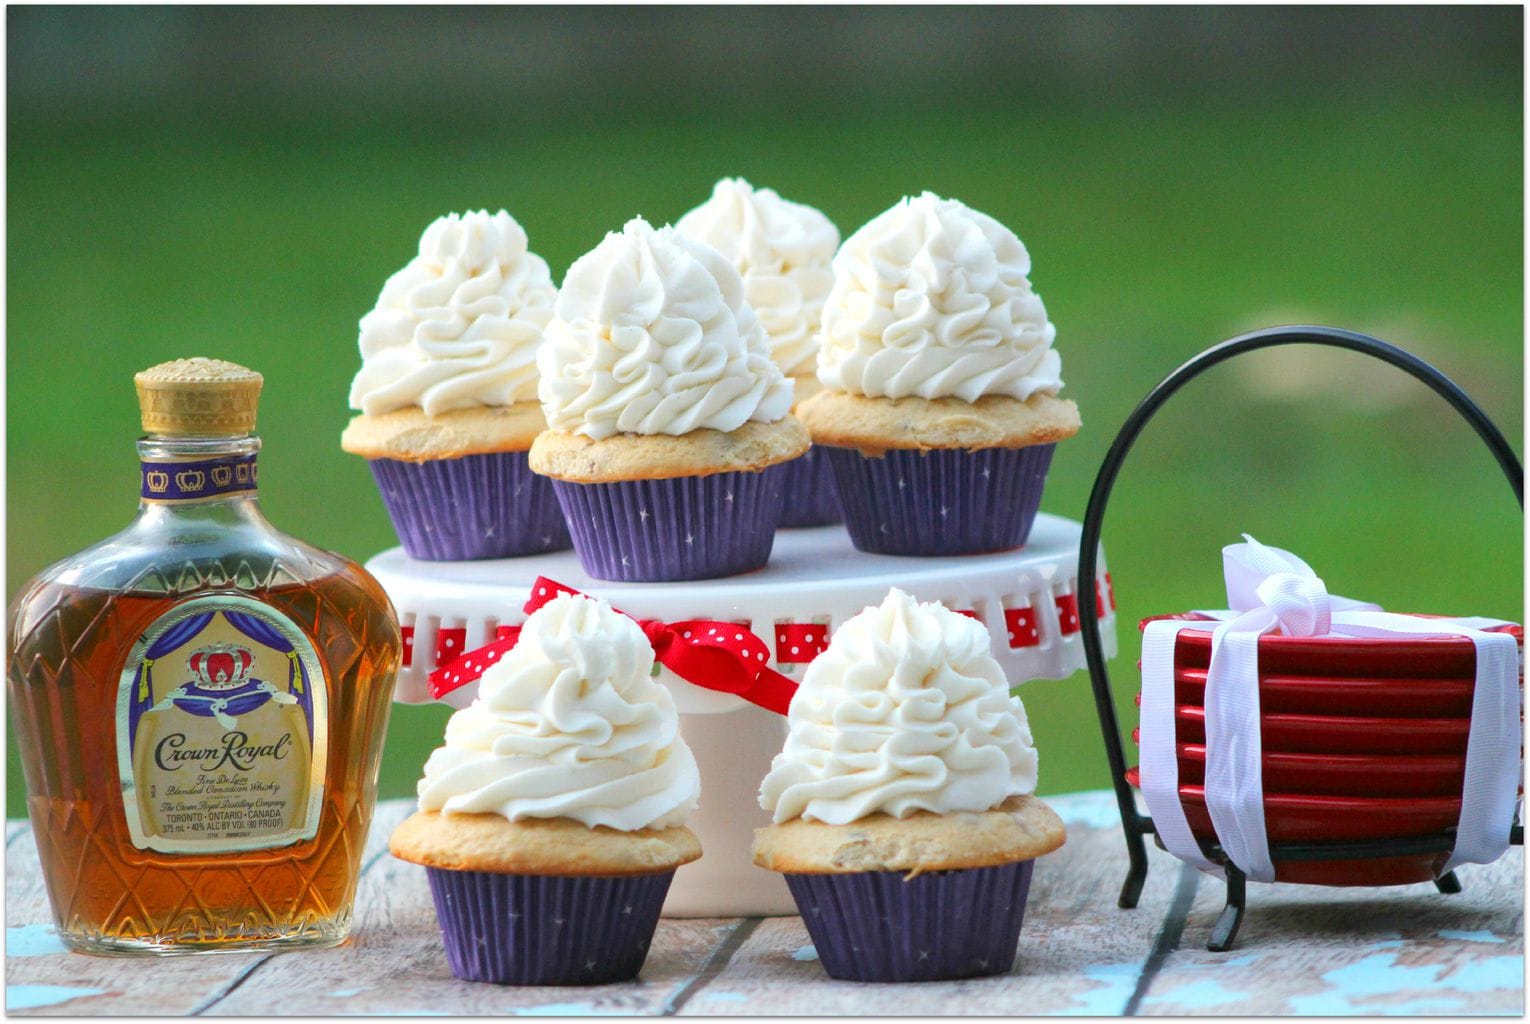 These delicious Crown Royal Cupcakes are the perfect dessert for your adult party! The flavor of the Crown Royal is subtle, with a hint of vanilla and fruit. The next time you need a recipe for something special to bring to a party, try this amazing sweet treat! 